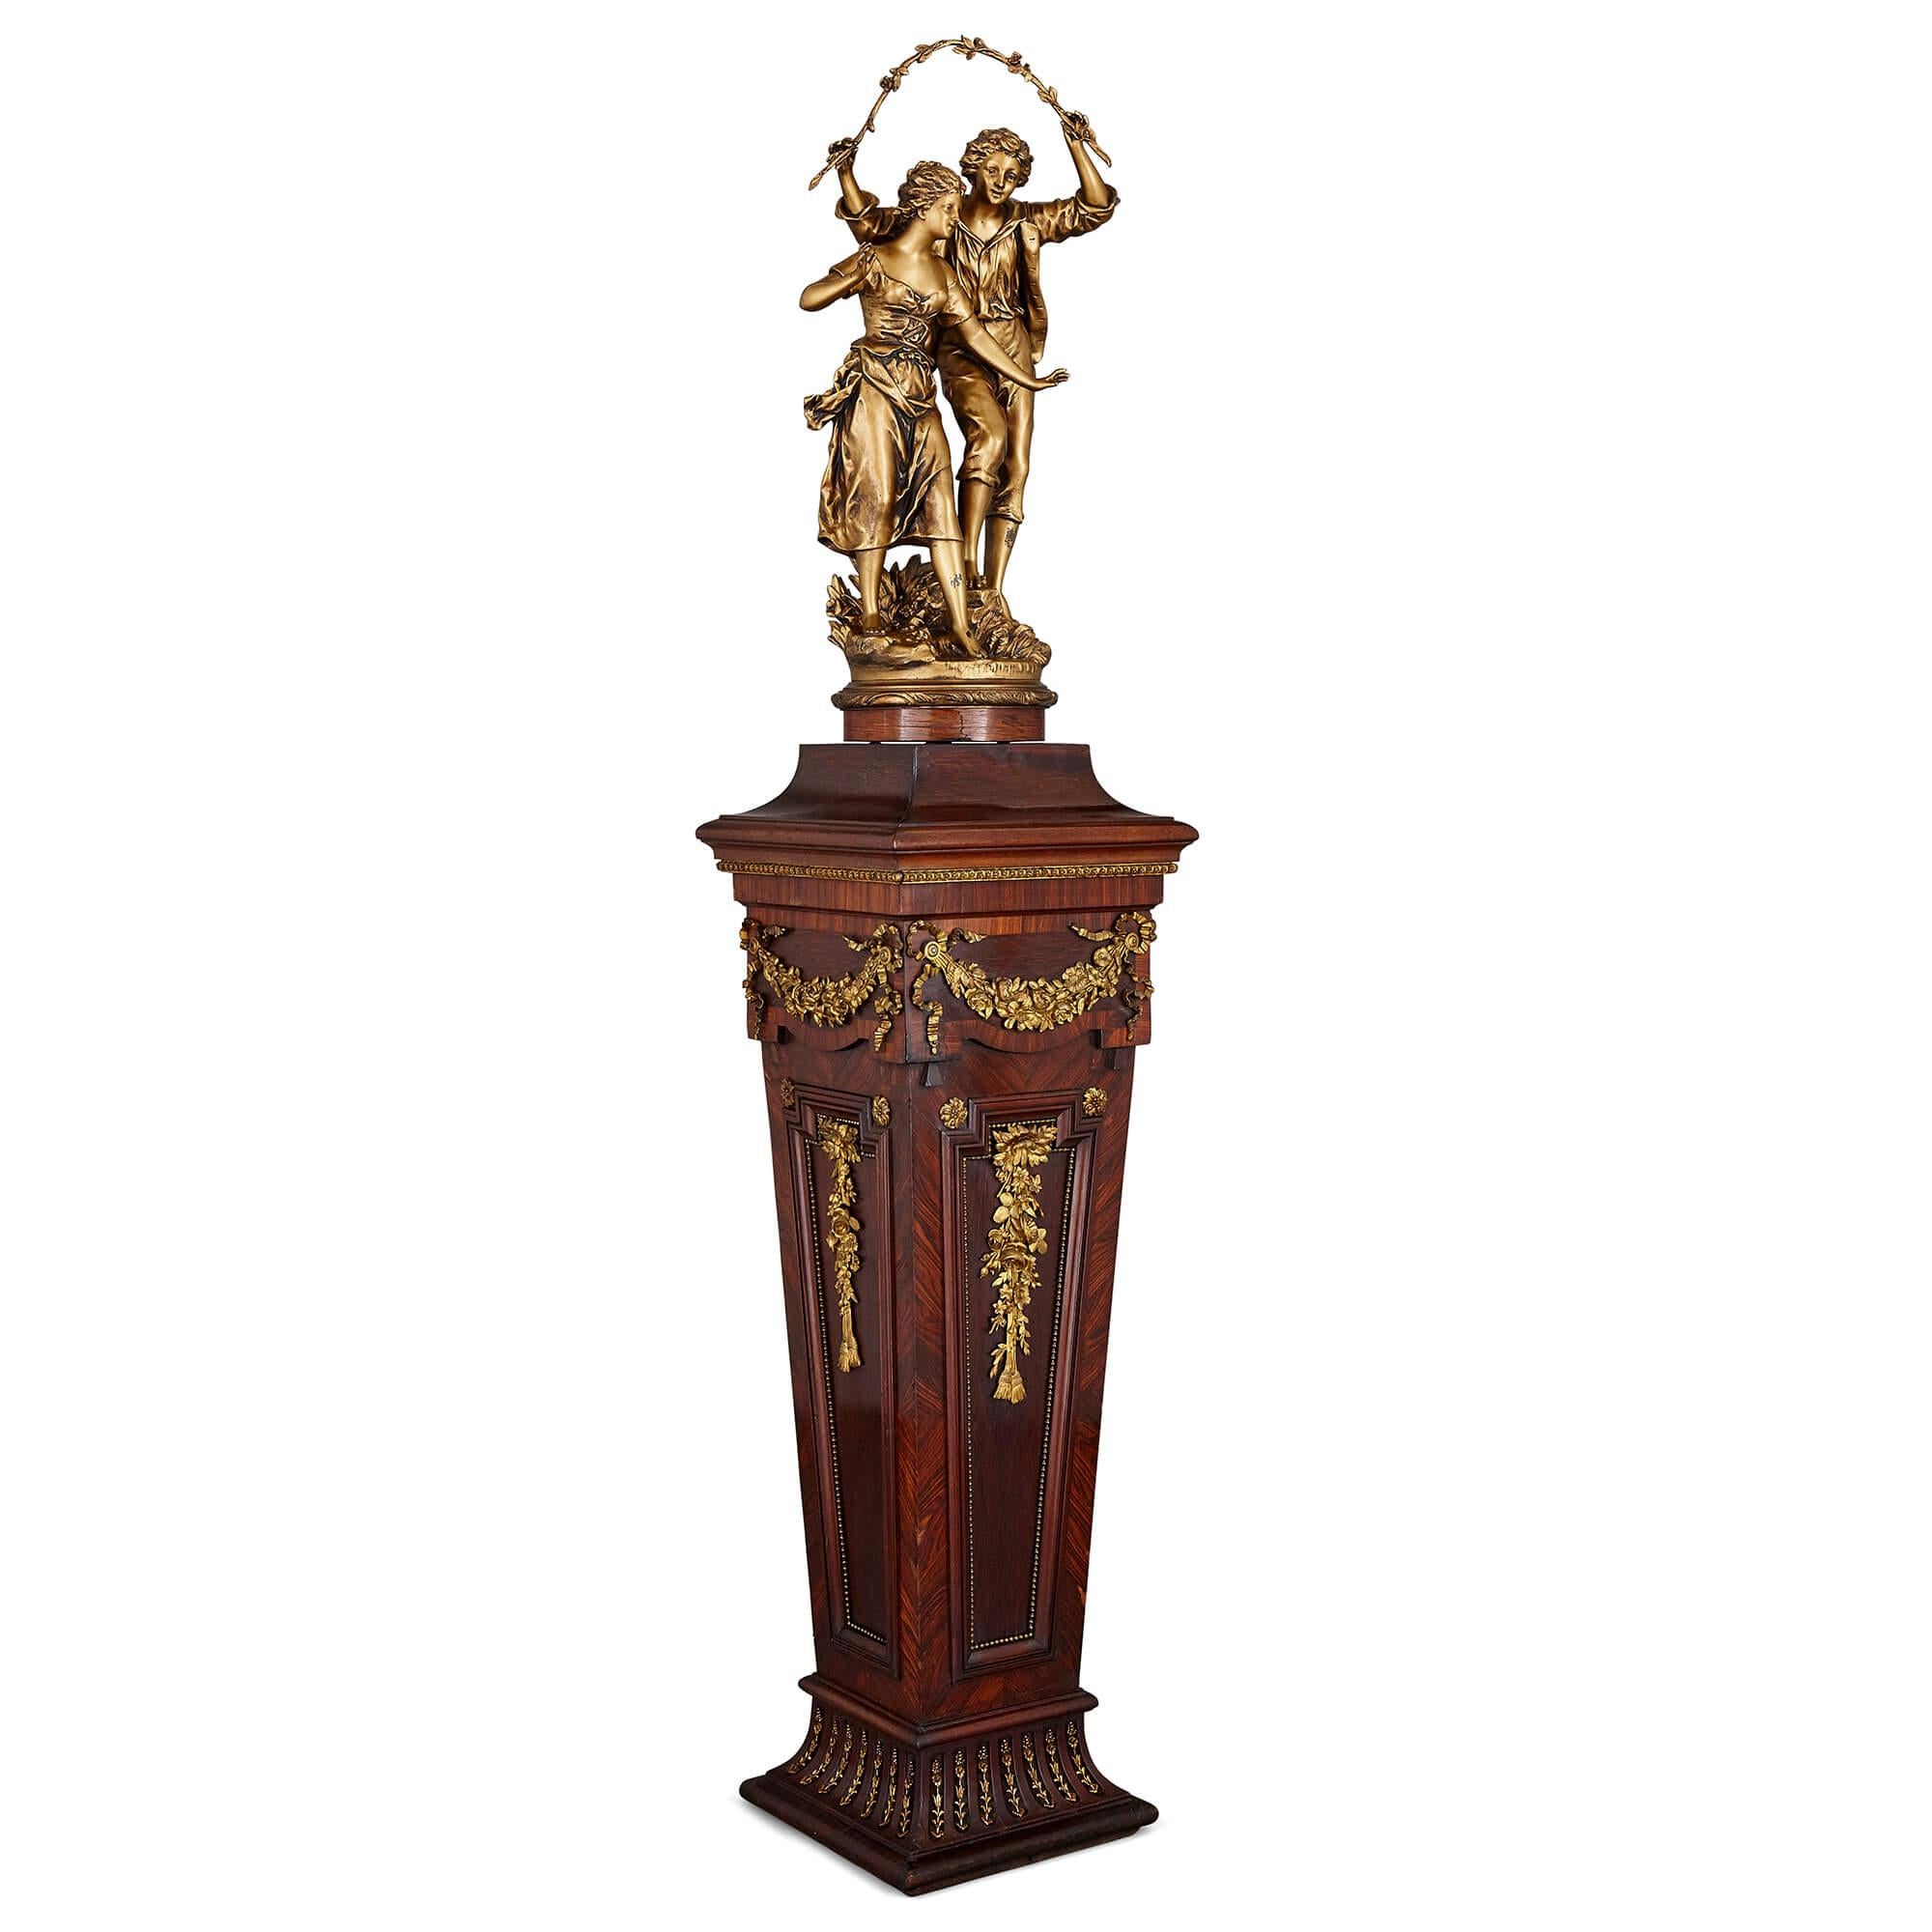 French gilt metal sculpture on Neoclassical pedestal by Ernest Rancoulet
French, early 20th century
Measures: Height 165cm, width 34cm, depth 34cm

This fine sculpture group is by the French artist Ernest Rancoulet, who lived from 1870 until